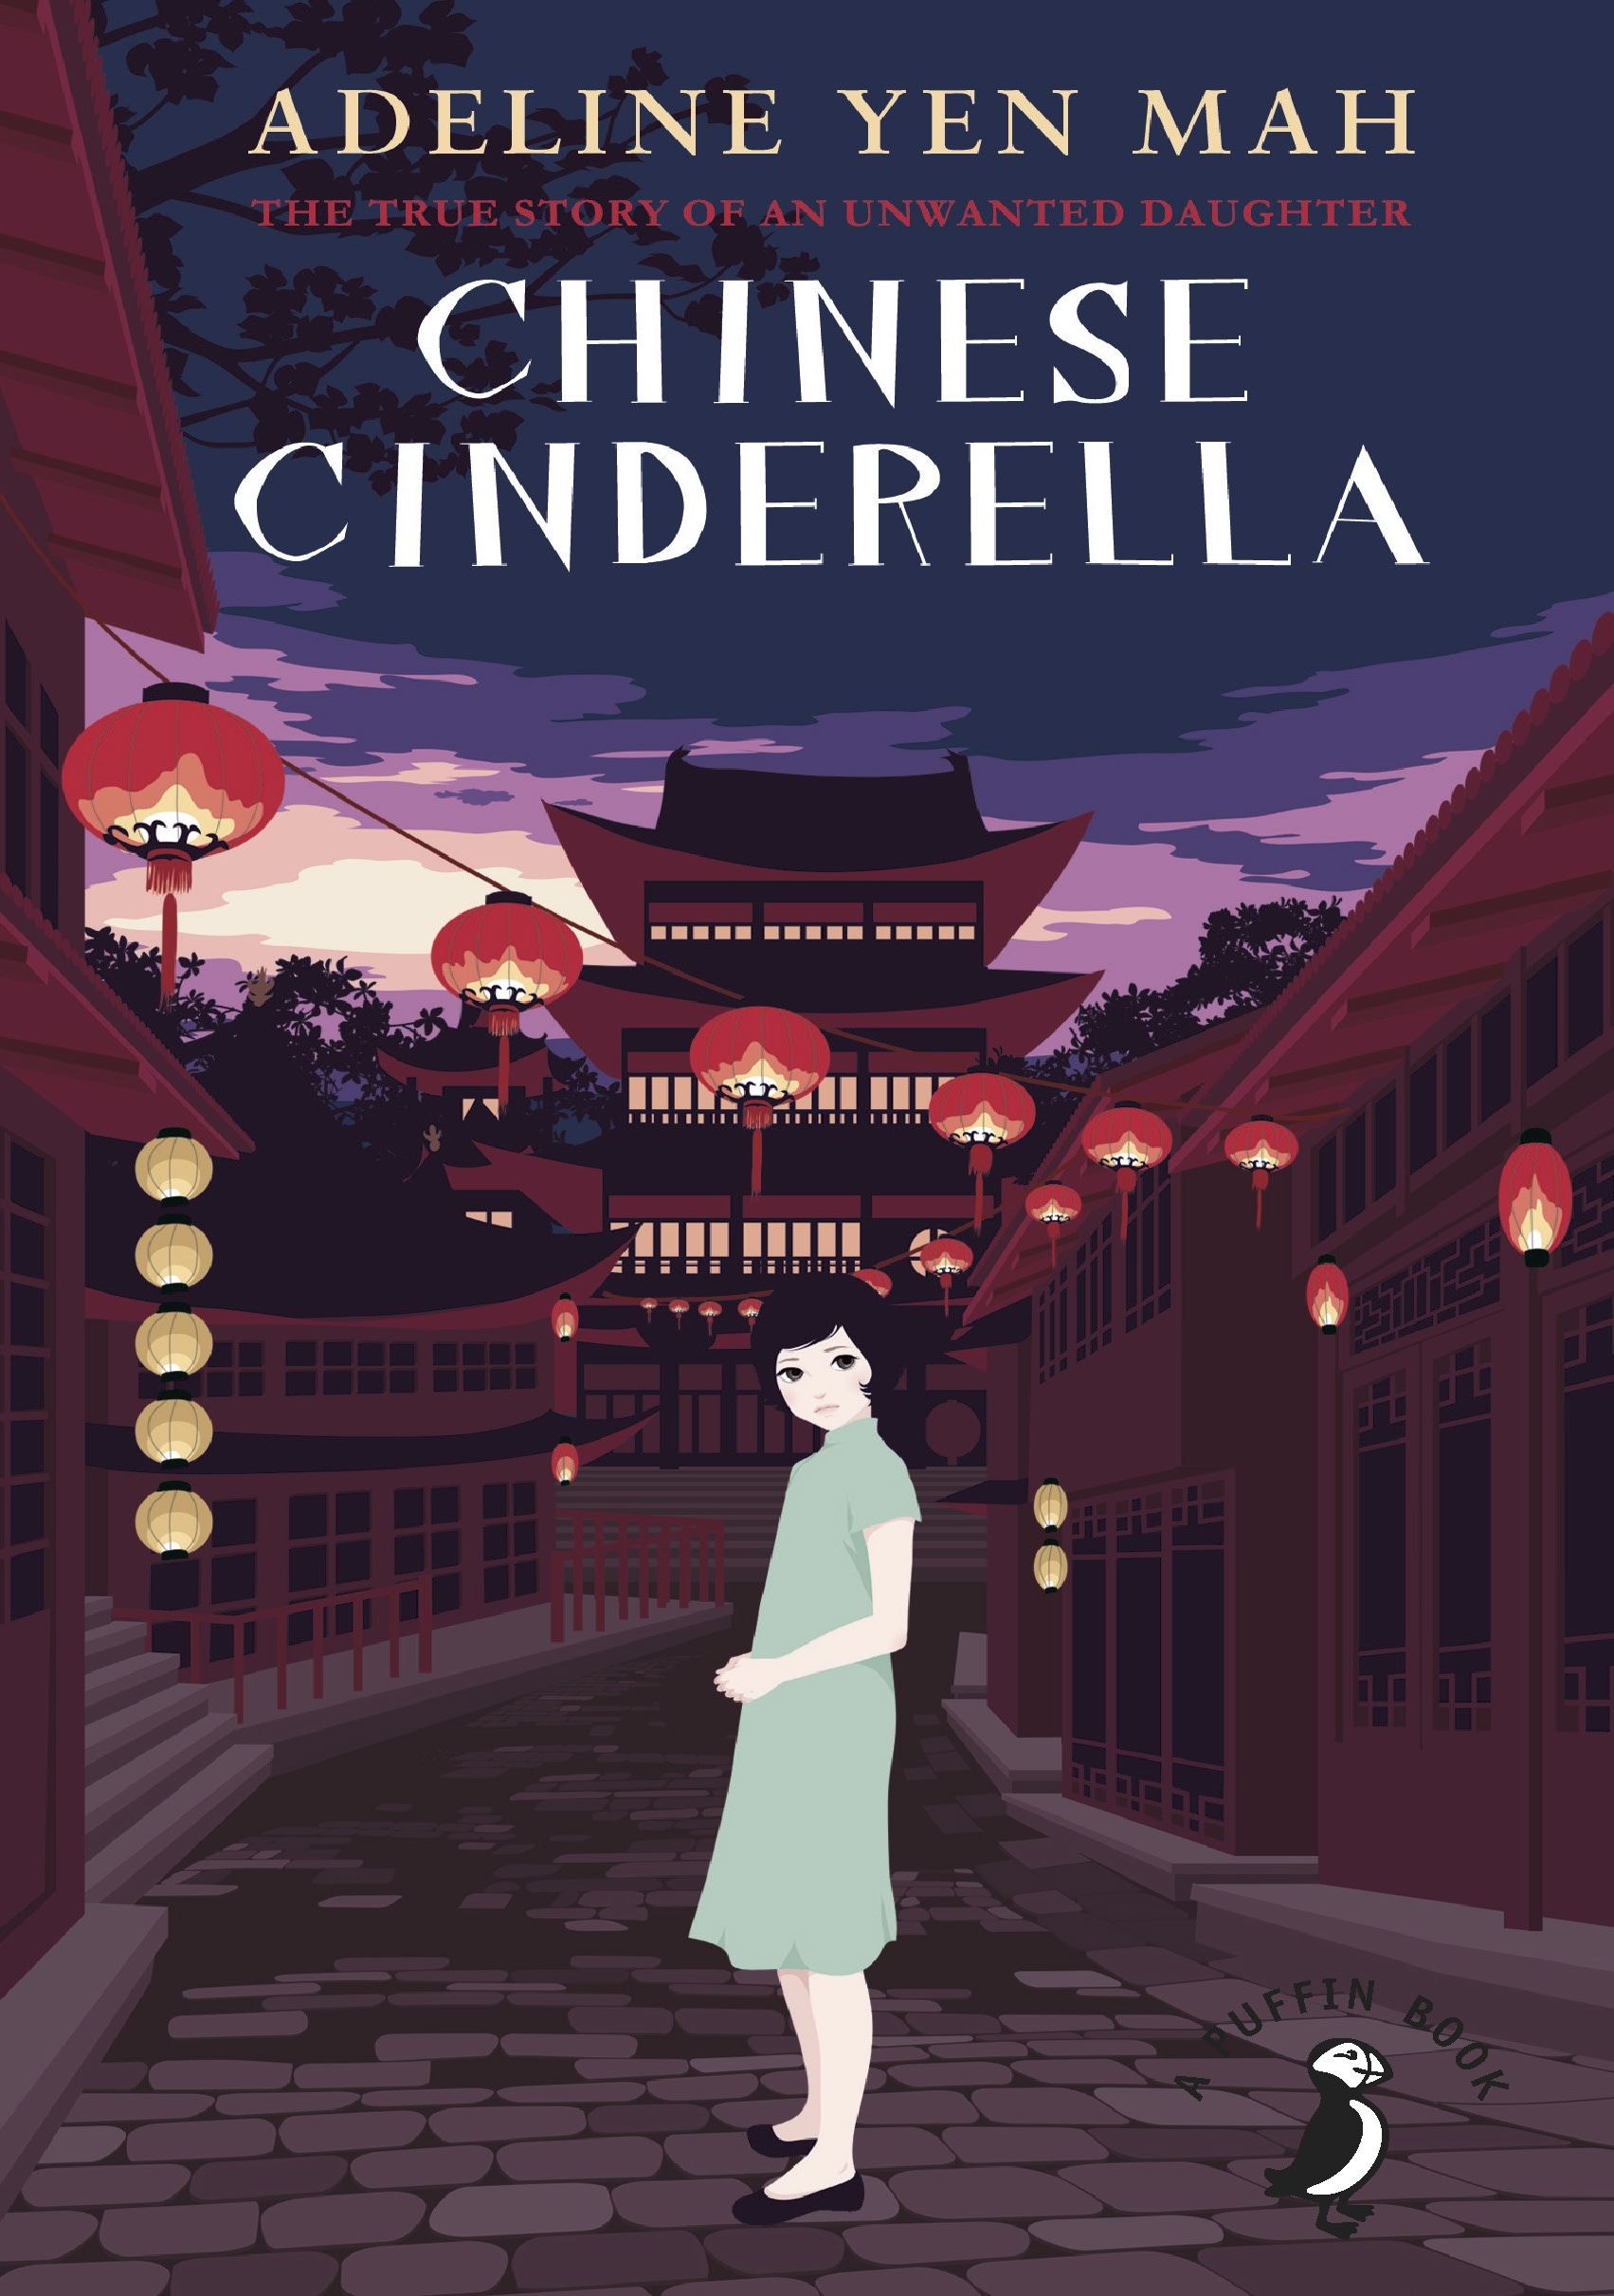 Book “Chinese Cinderella” by Adeline Yen Mah — July 2, 2015